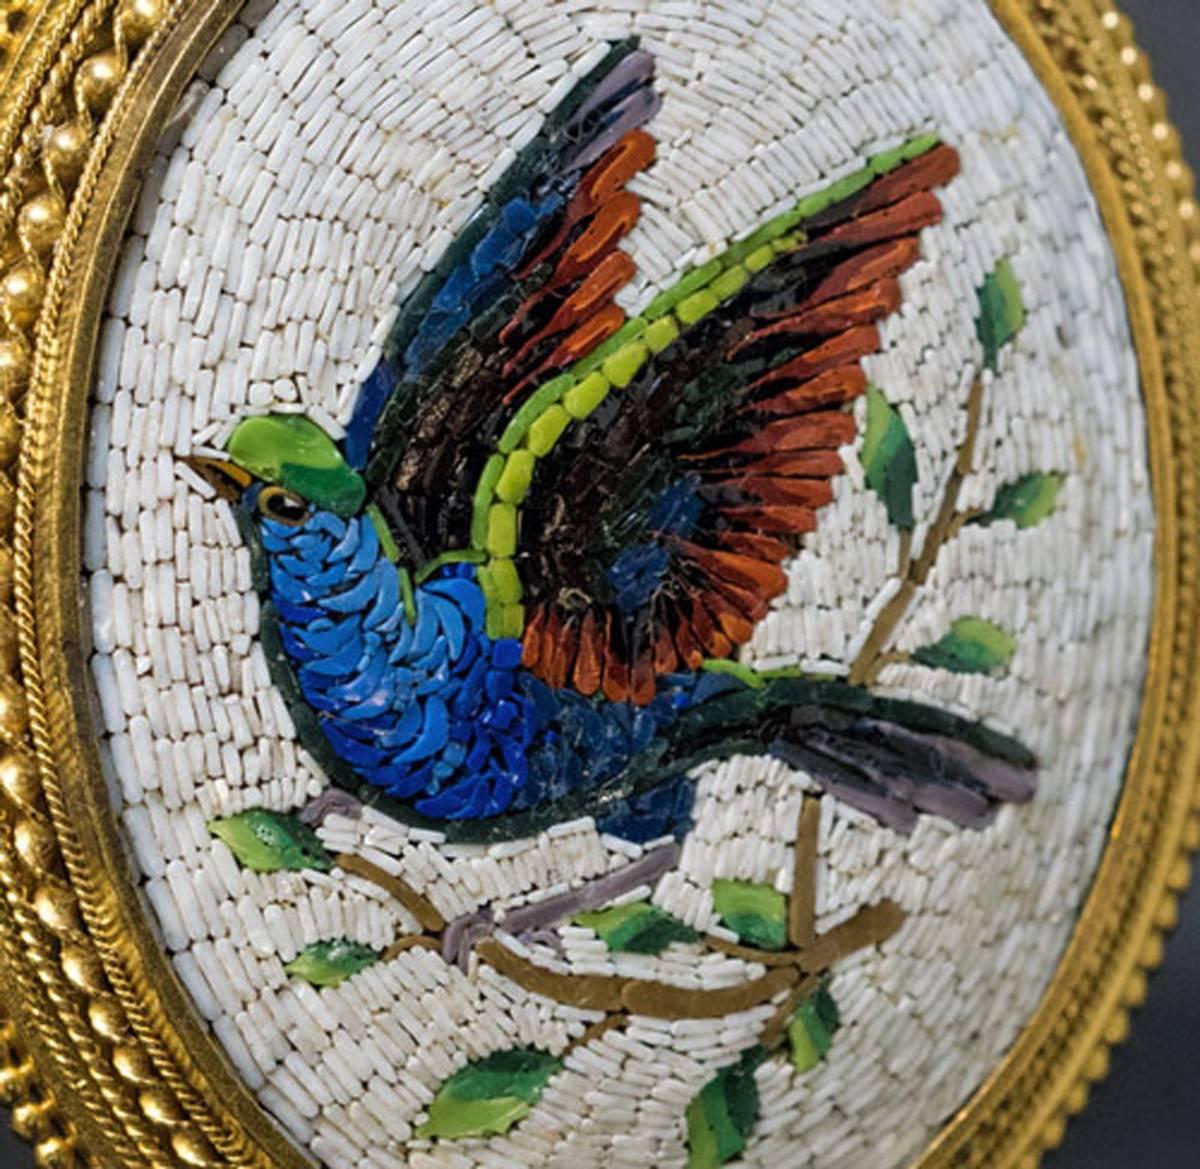 Circa 1860

A high quality large antique Italian micro mosaic pendant depicts a colorful bird of paradise. The micro mosaic plaque is set in a finely crafted Etruscan revival 18K gold bezel. The back of the pendant is fitted with a glazed picture